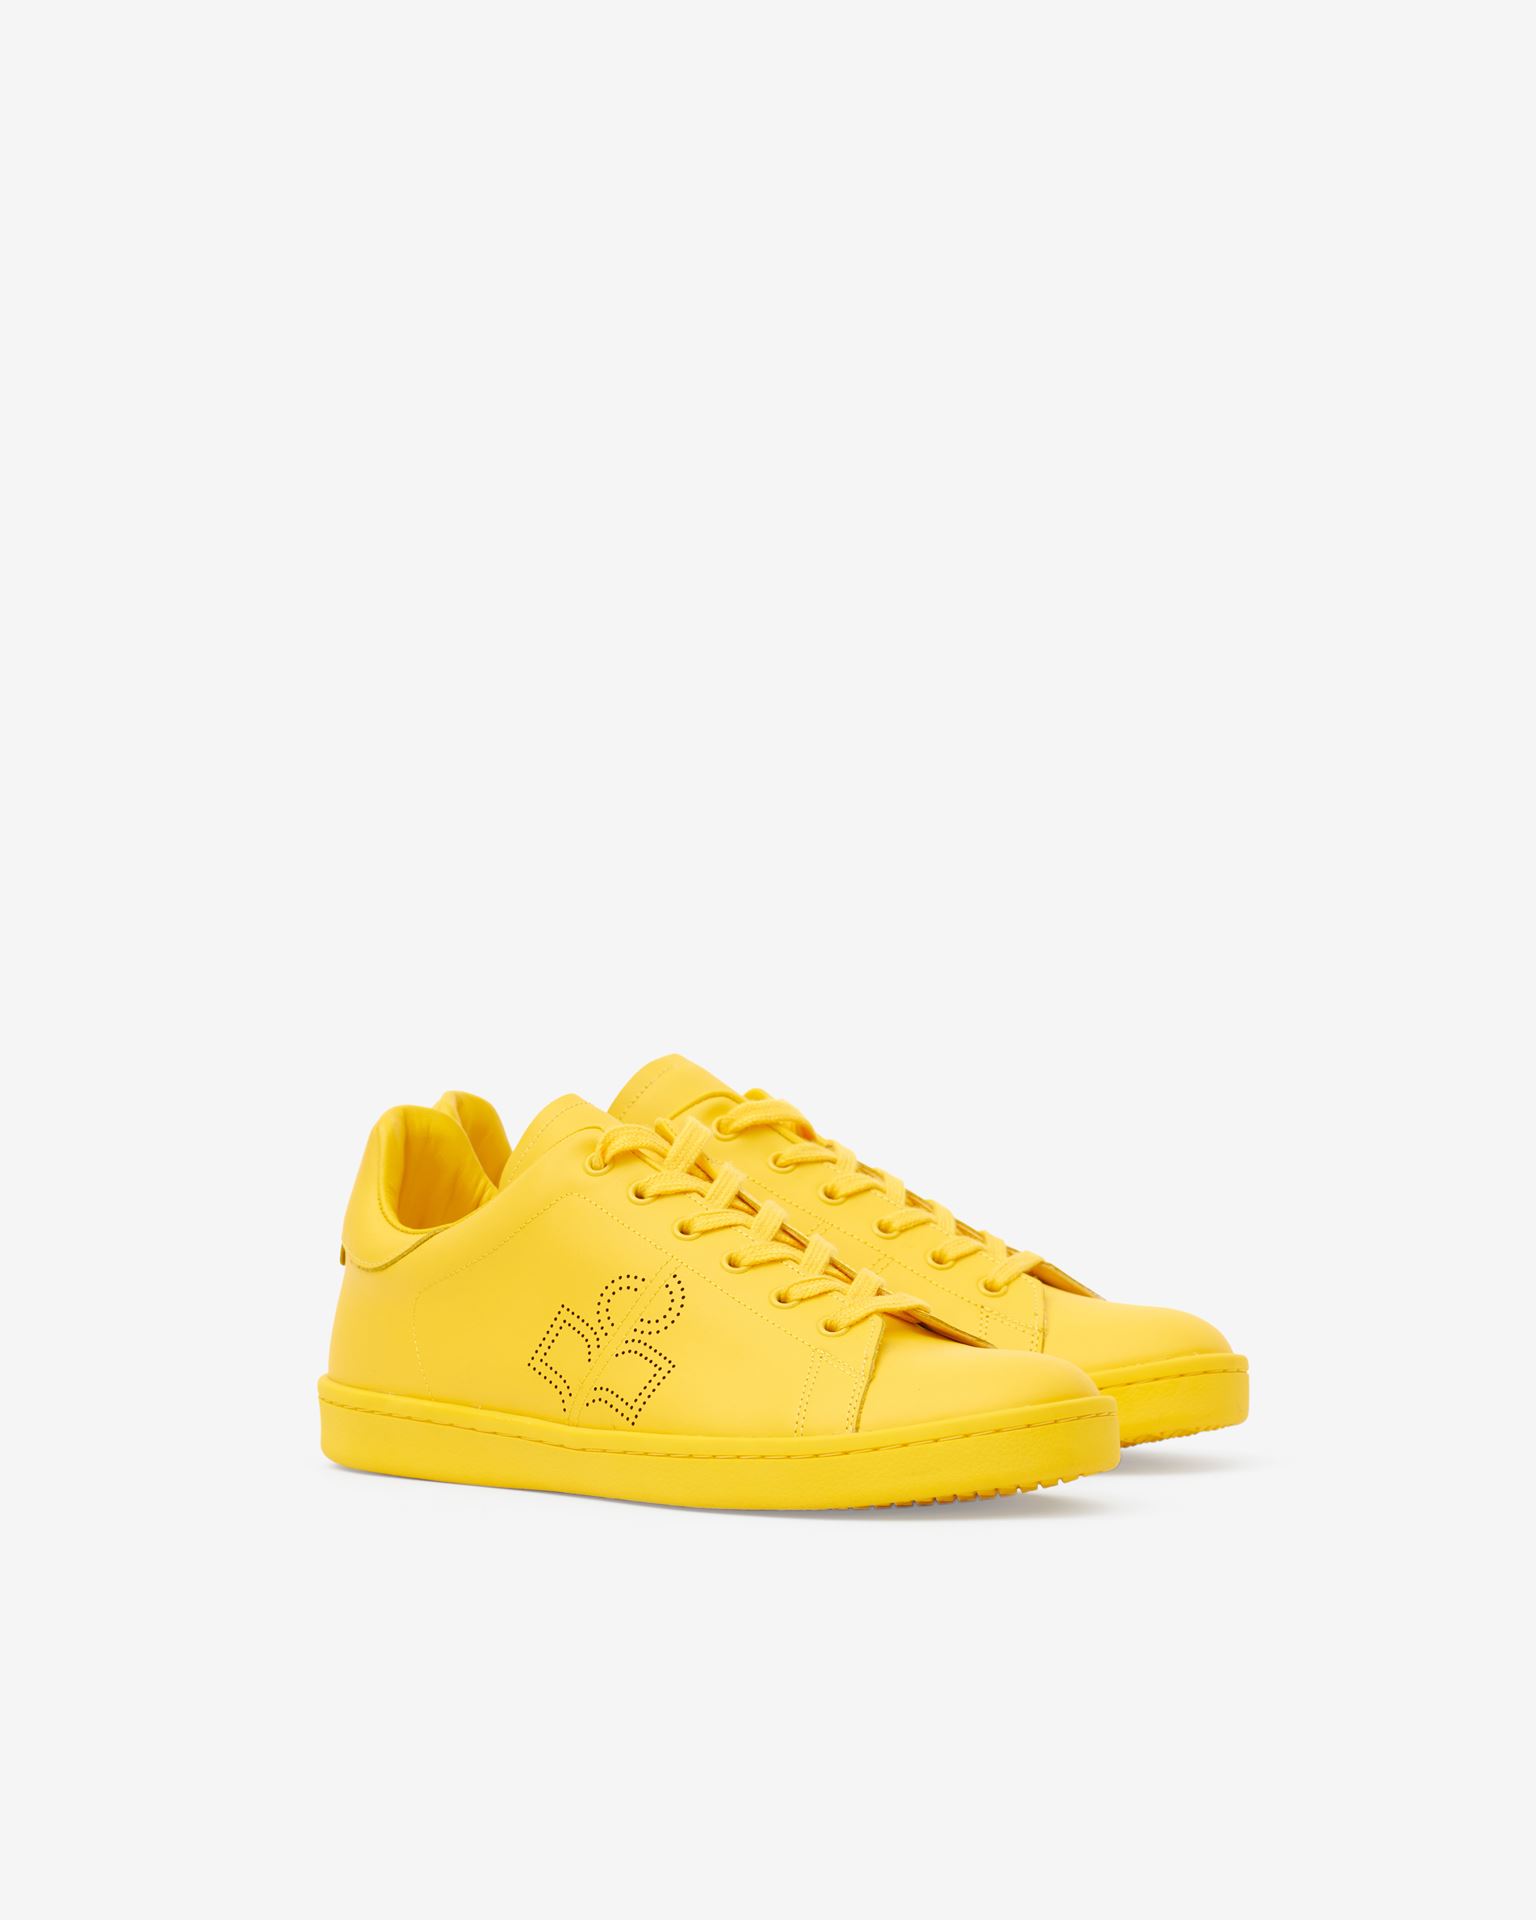 Isabel Marant, Barth Leather Sneakers - Men - Yellow